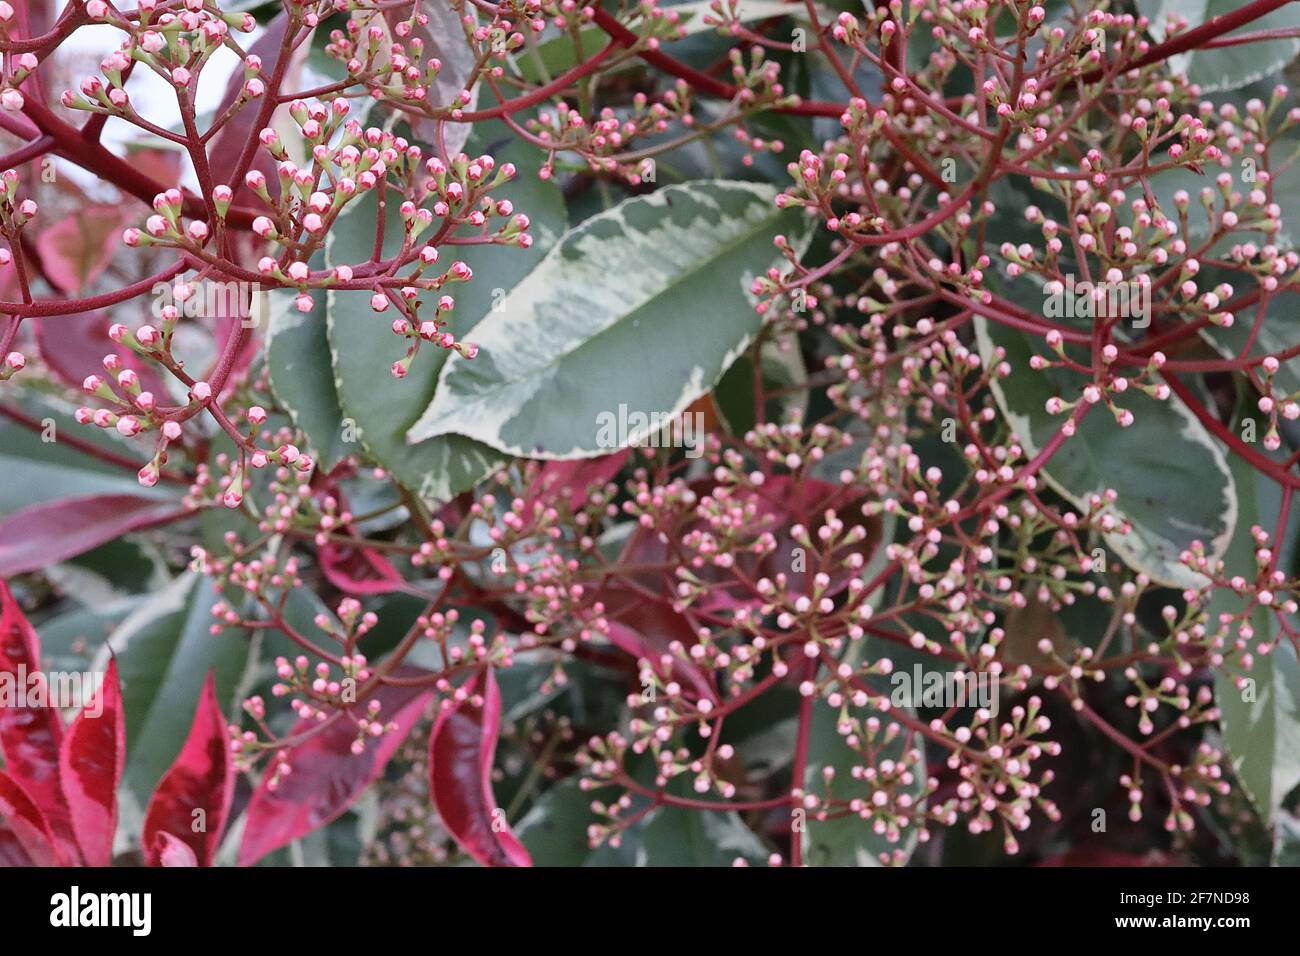 Photinia x fraseri 'Louise' Christmas berry Louise – maroon leaf shoots,  budding flower clusters and dark green leaves with cream edges, April, UK  Stock Photo - Alamy